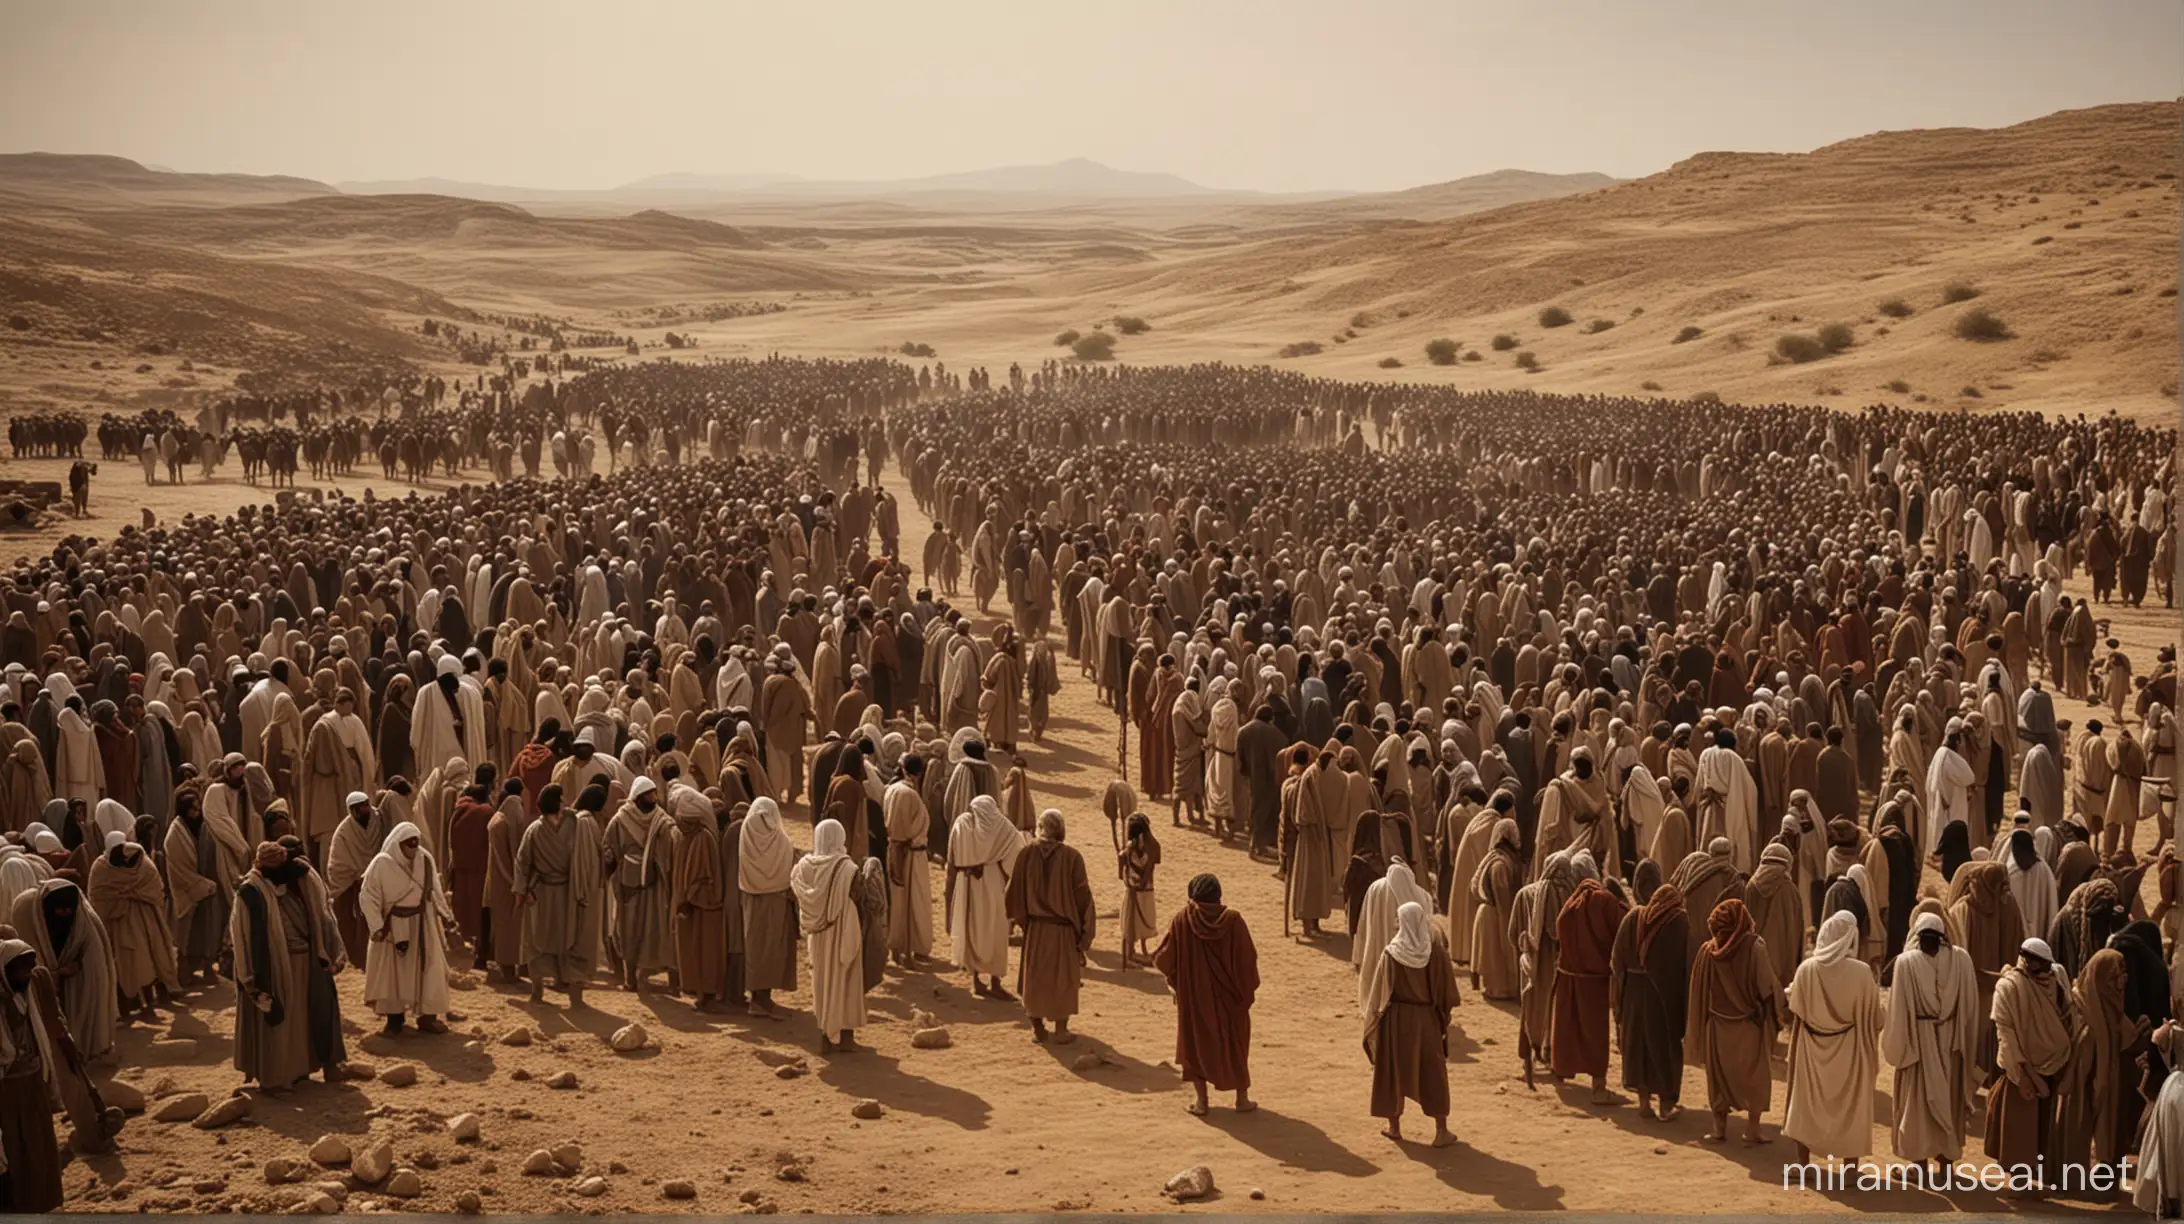 Isaac from the bible dies, and there is a gathering to mourne his death. set in the Middle East during the era of Moses.